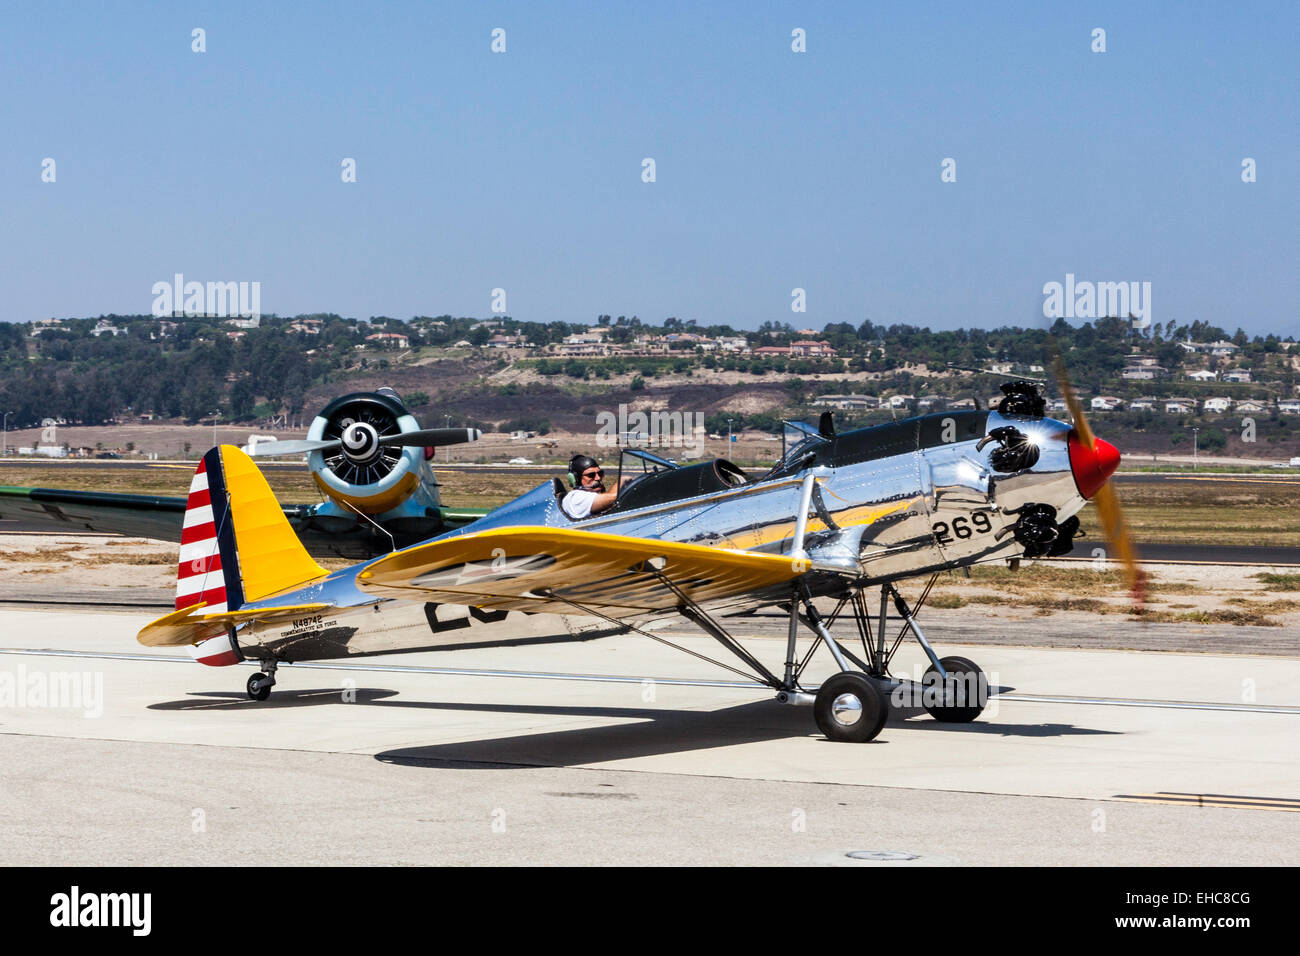 A Ryan PT-22 trainer aircraft at the 2011 Wings Over Camarillo Air Show in Camarillo California Stock Photo